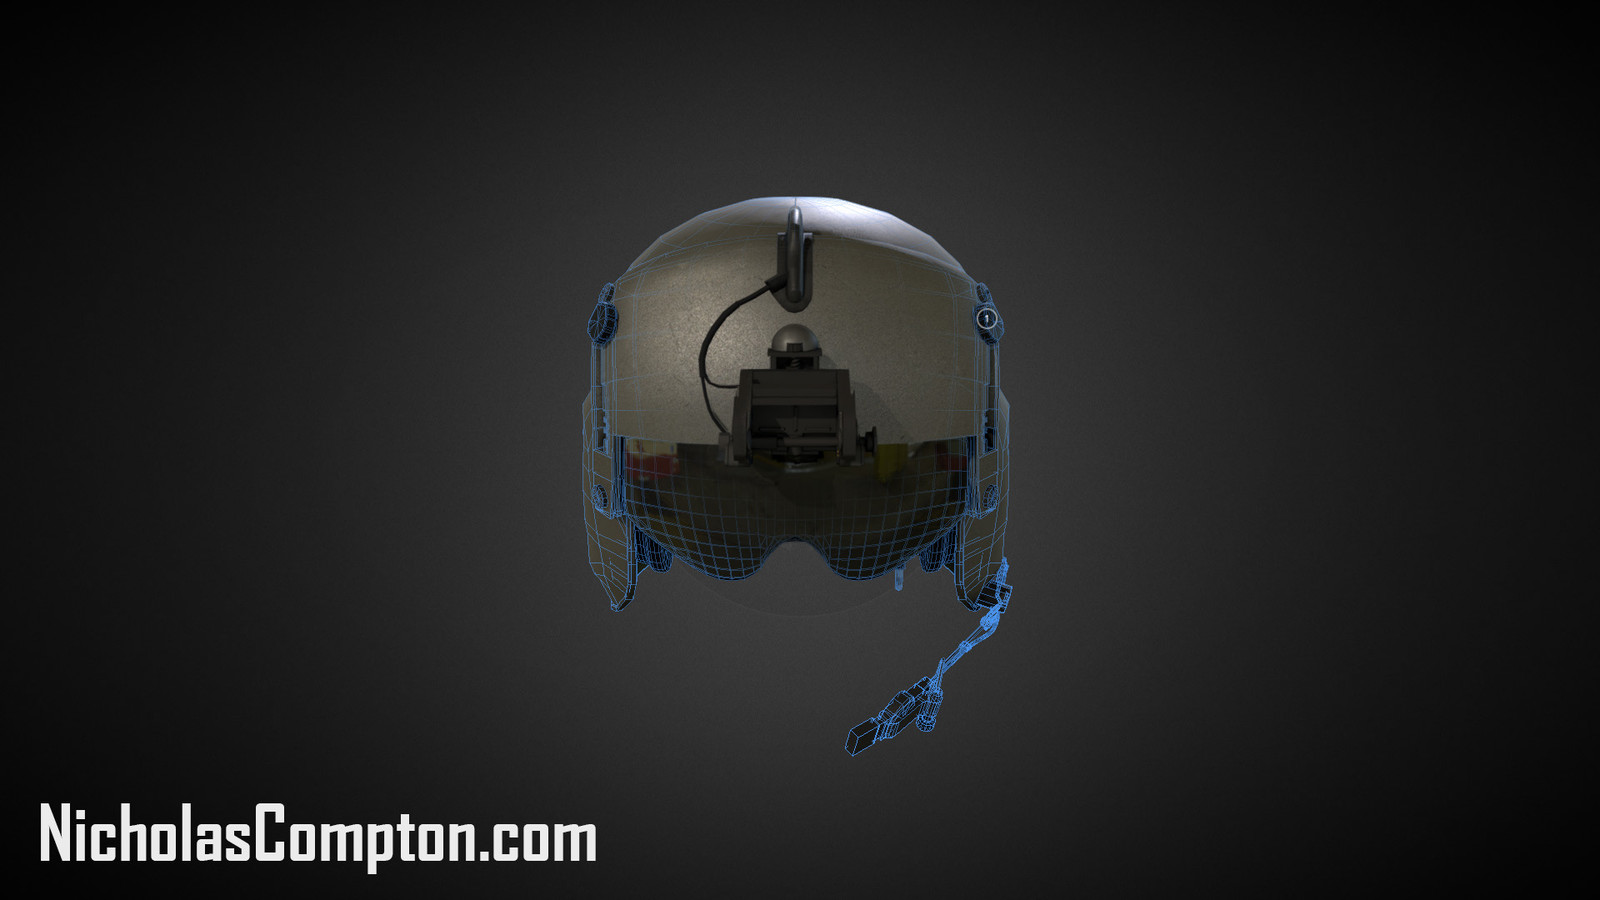 Helmet Render used in a rotatory wing pilot equipment training application. Sketchfab version can be found at https://sketchfab.com/ncompton13